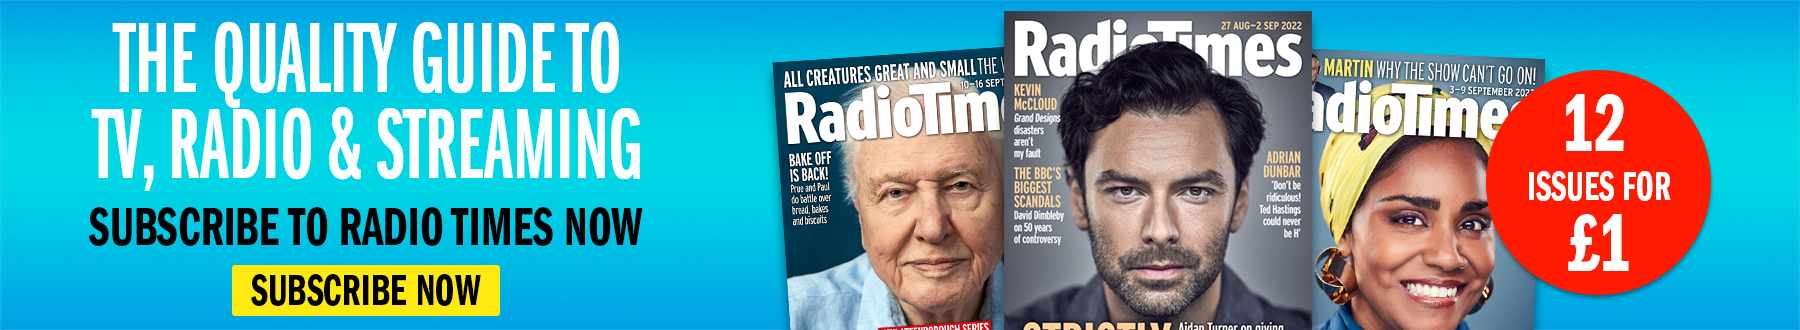 Radio Times subscription offer, with a selection of magazine covers featuring David Attenborough, Aidan Turner and Nadiya Hussain